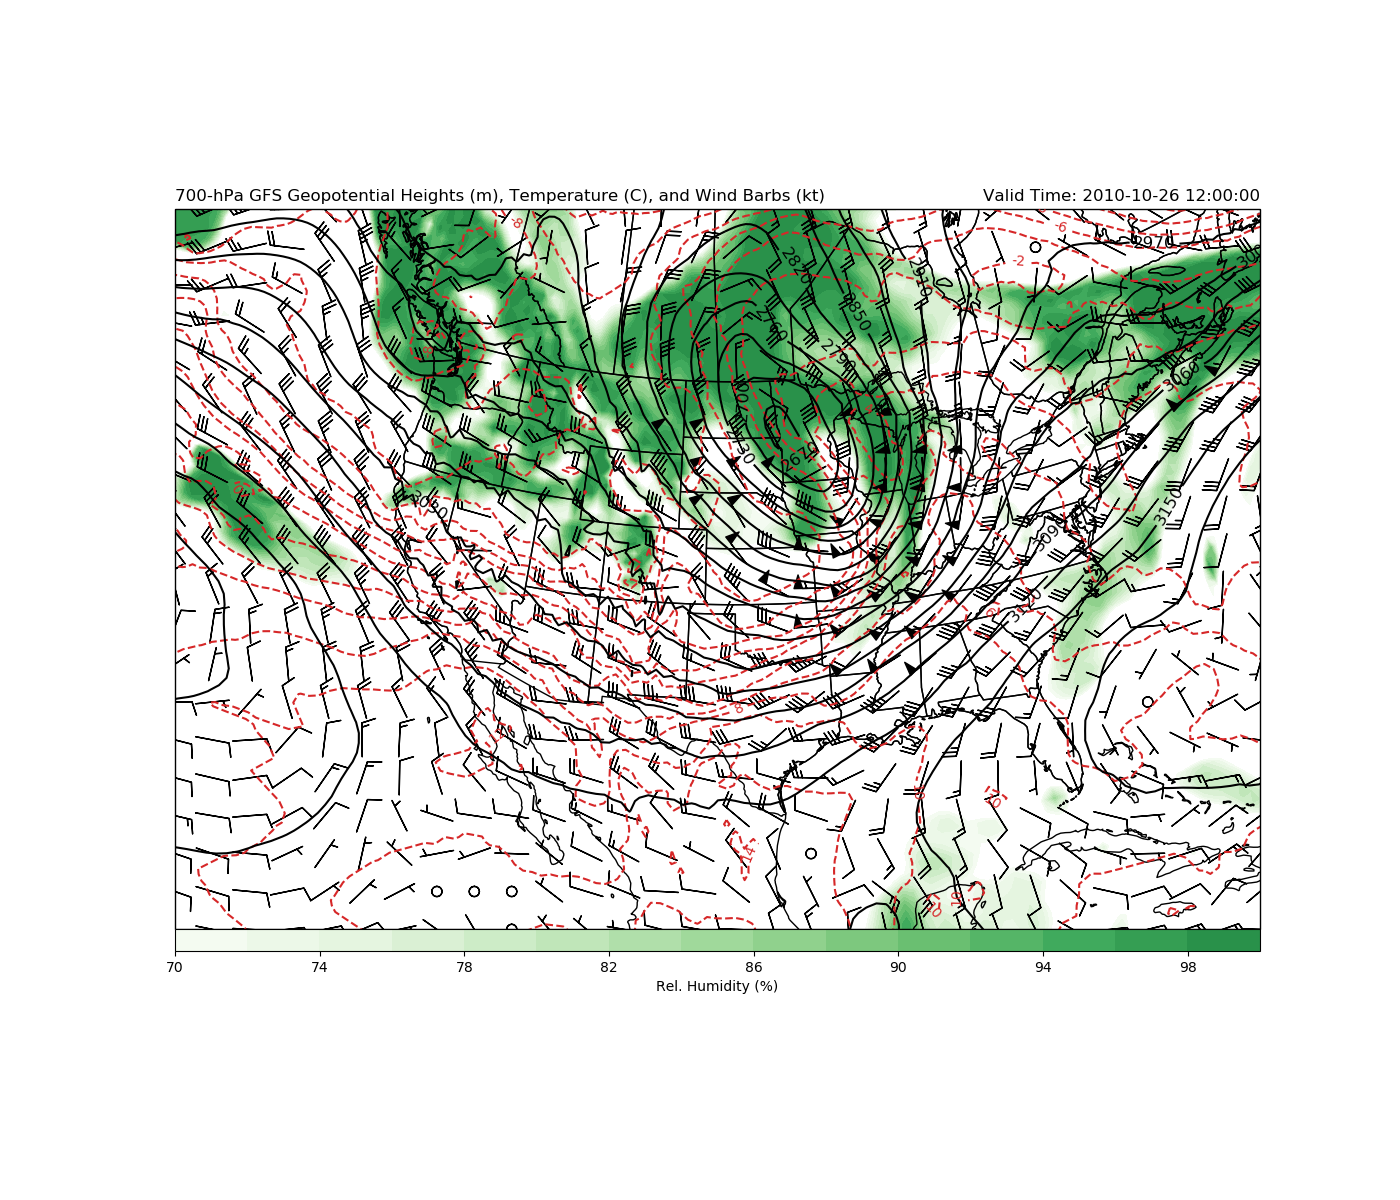 ../_images/sphx_glr_700hPa_RELH_Winds_001.png